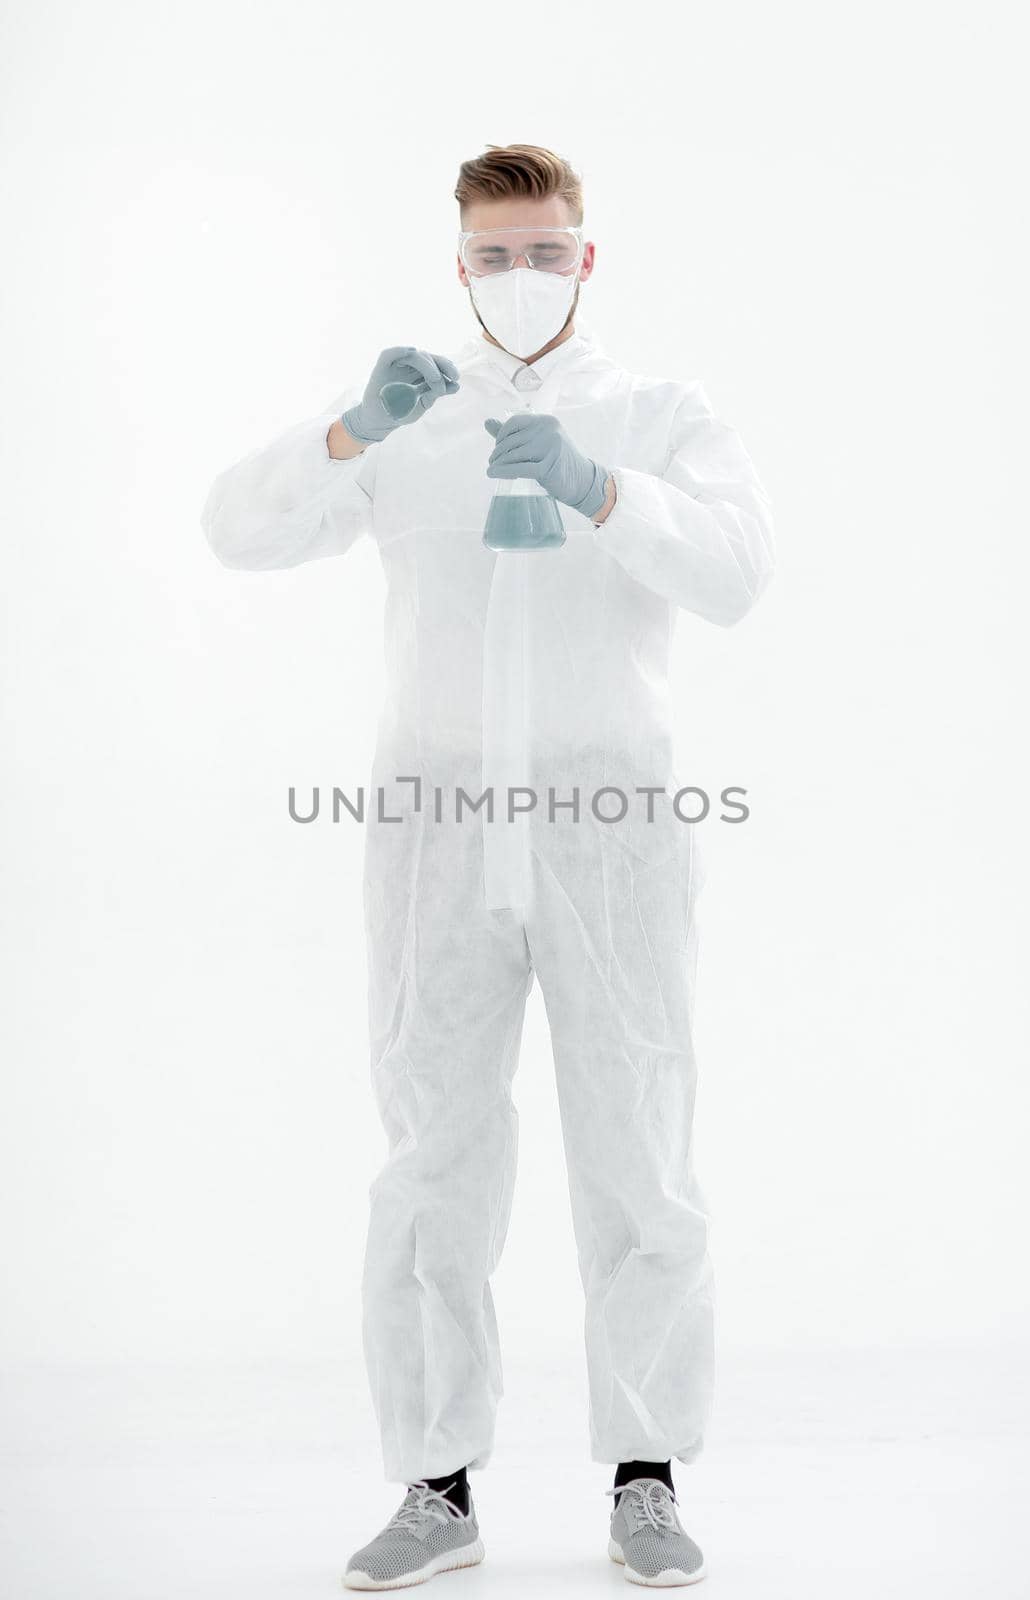 in full growth.a scientist in a protective suit examines the blue liquid.isolated on white